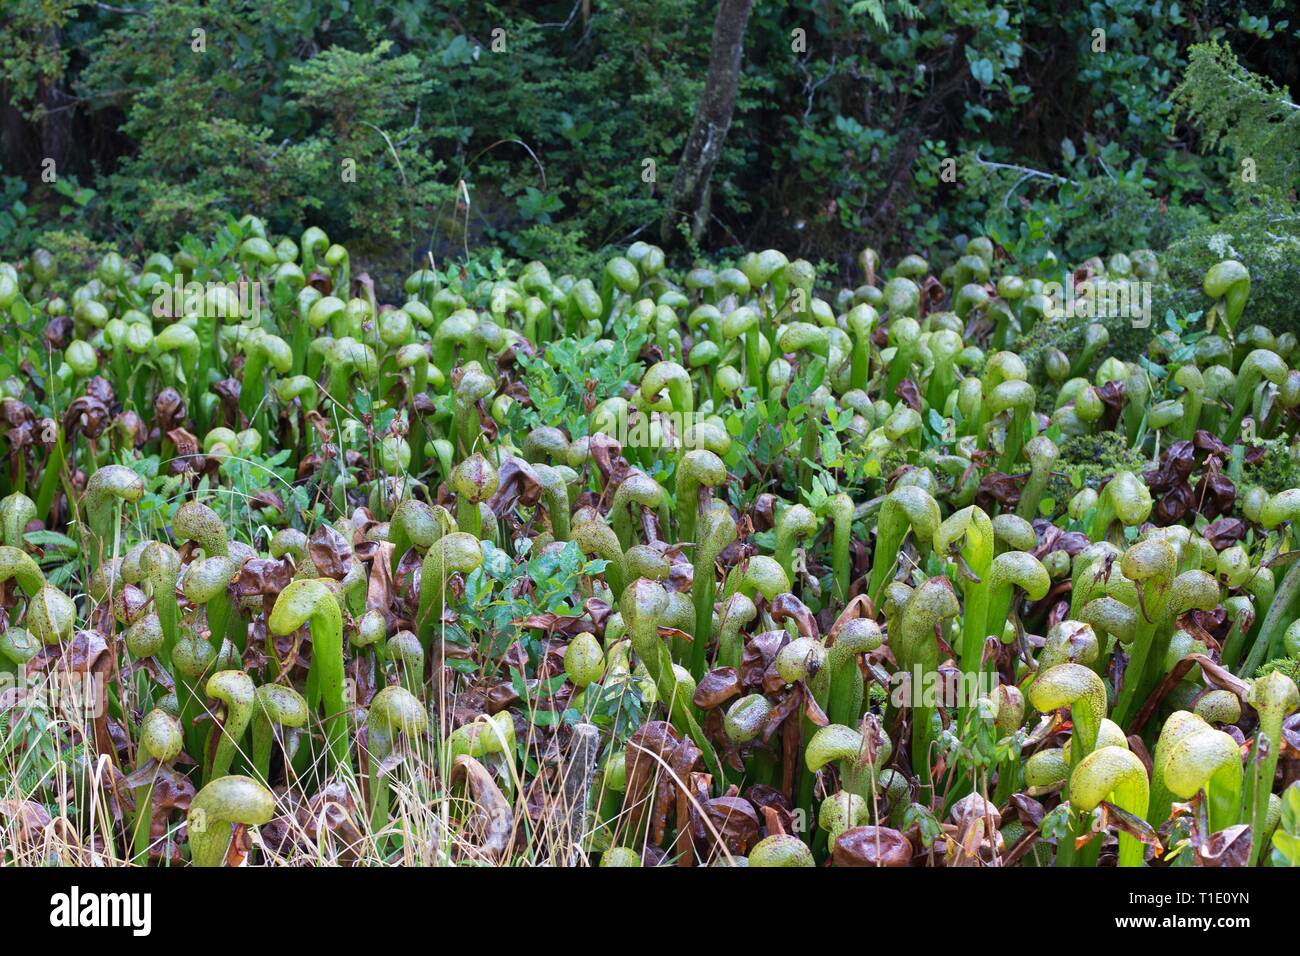 Darlingtonia californica, also known as Pitcher Plant or Cobra lily, growing at Darlingtonia Natural Site in Florence, OR, USA. Stock Photo